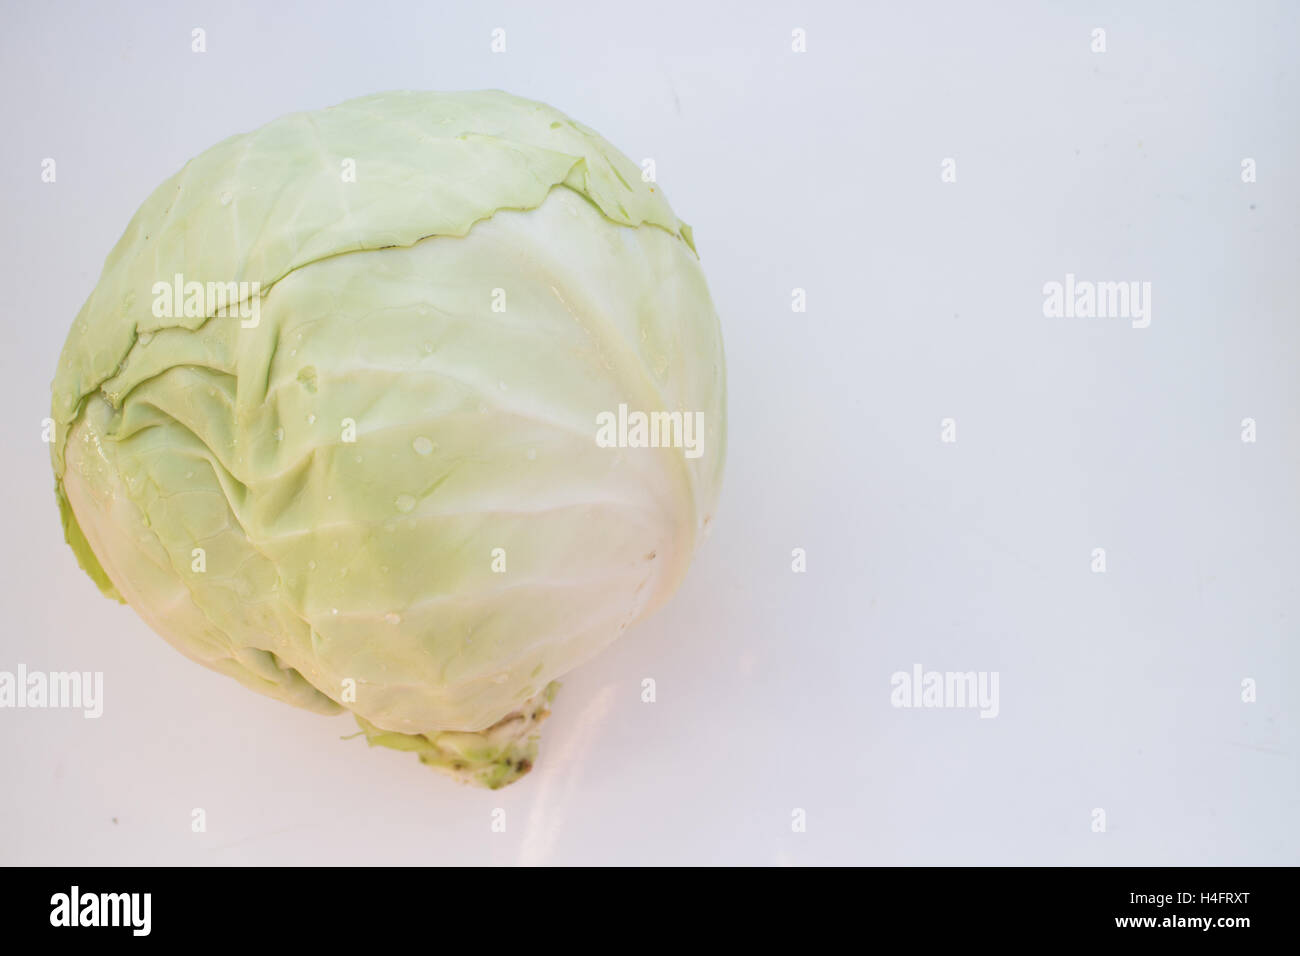 Head of green cabbage used for cooking or food, food inspired Stock Photo